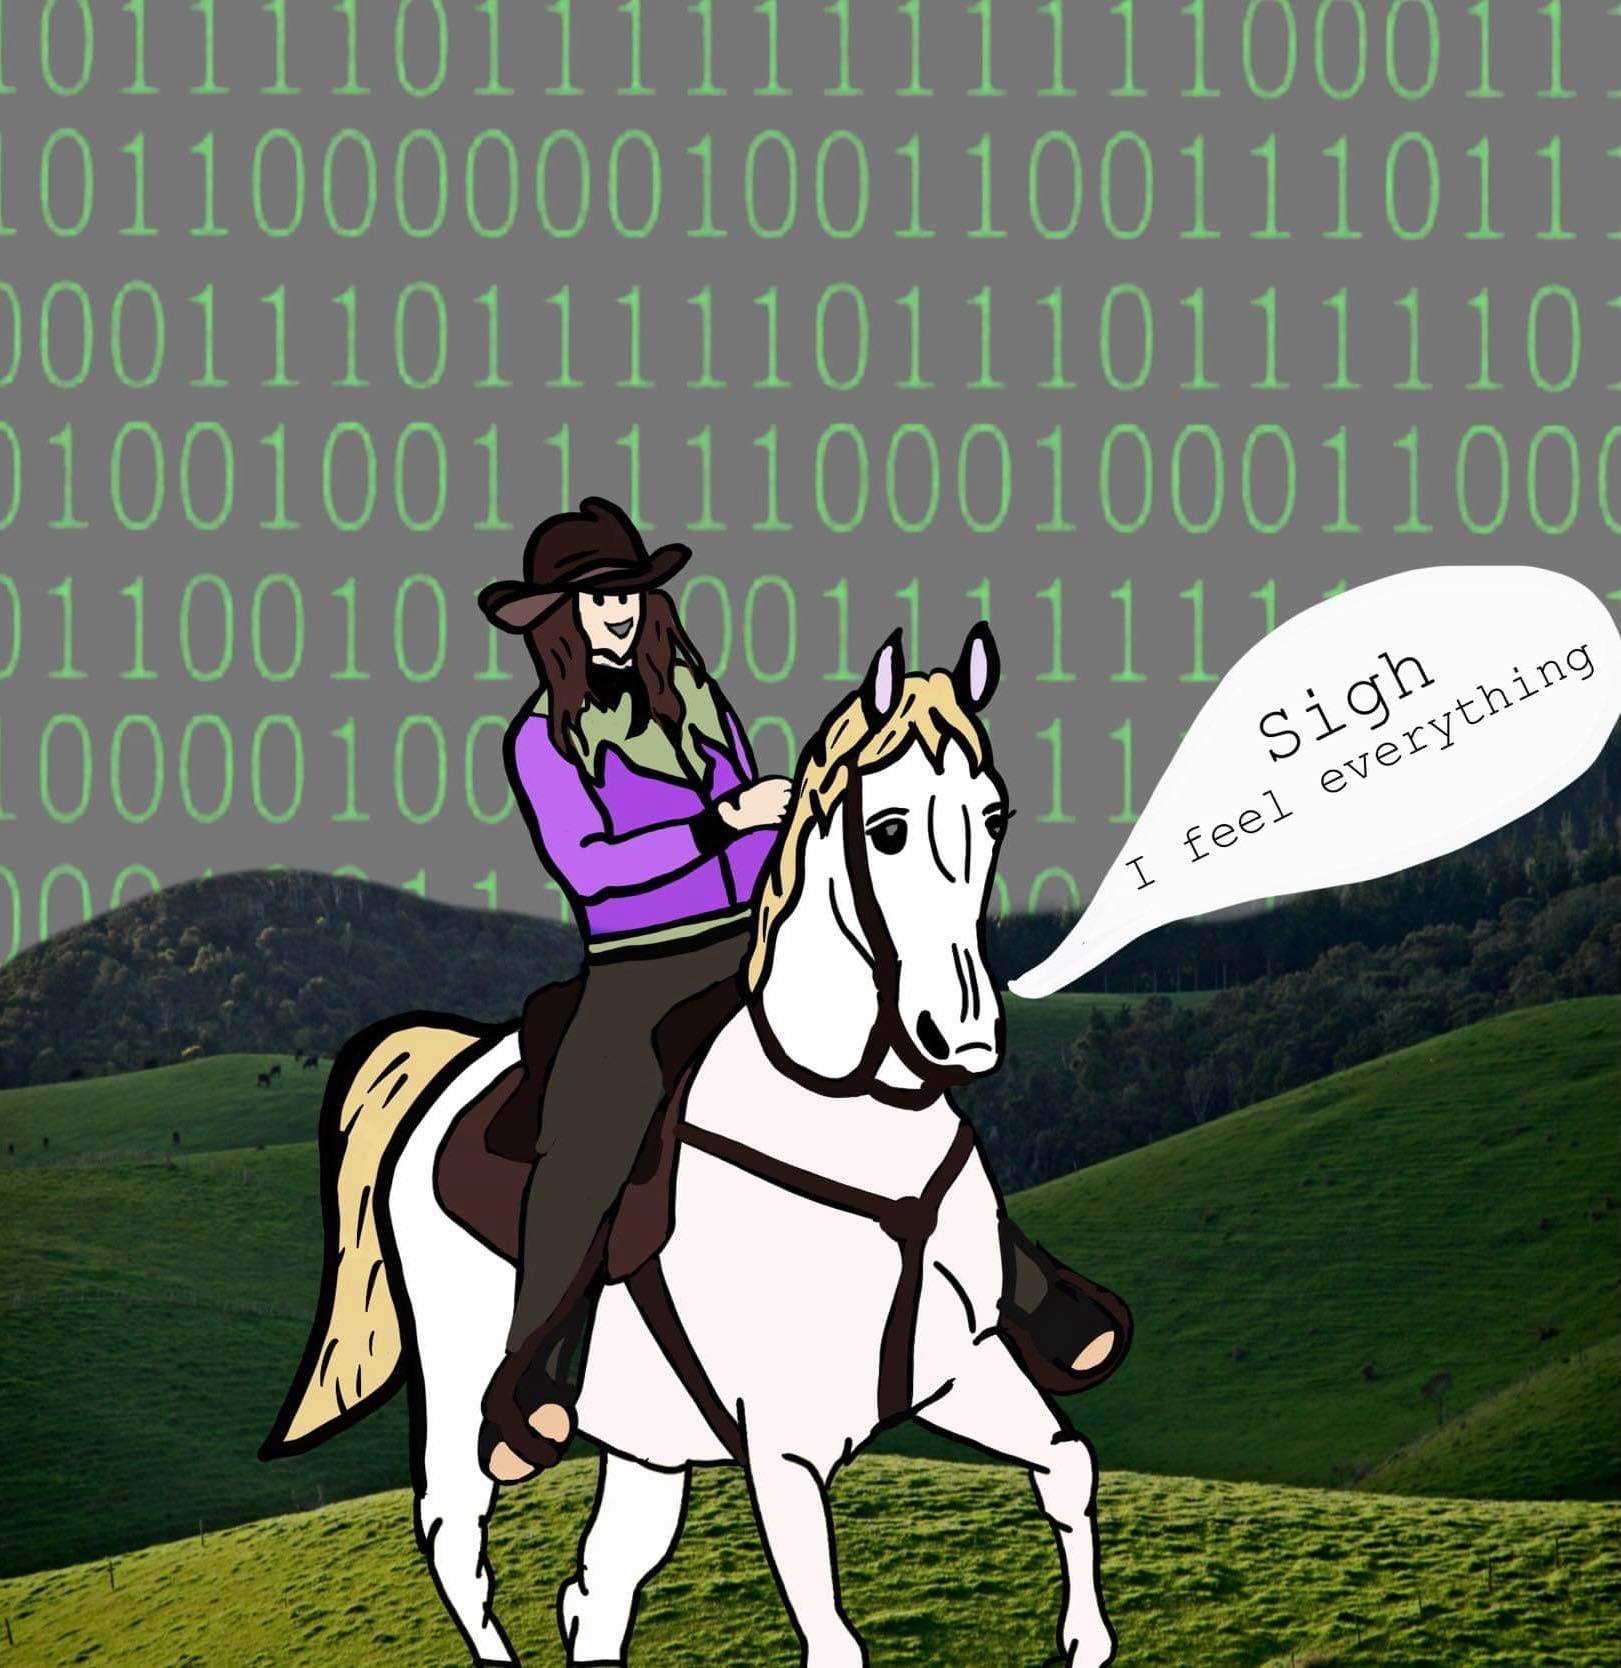 A digital illustration of a white horse with a cowgirl riding on the back. There are rolling green fields and the sky has binary. The horse has a melancholy look on it's face and a speech bubble that reads "sigh, I feel everything.".